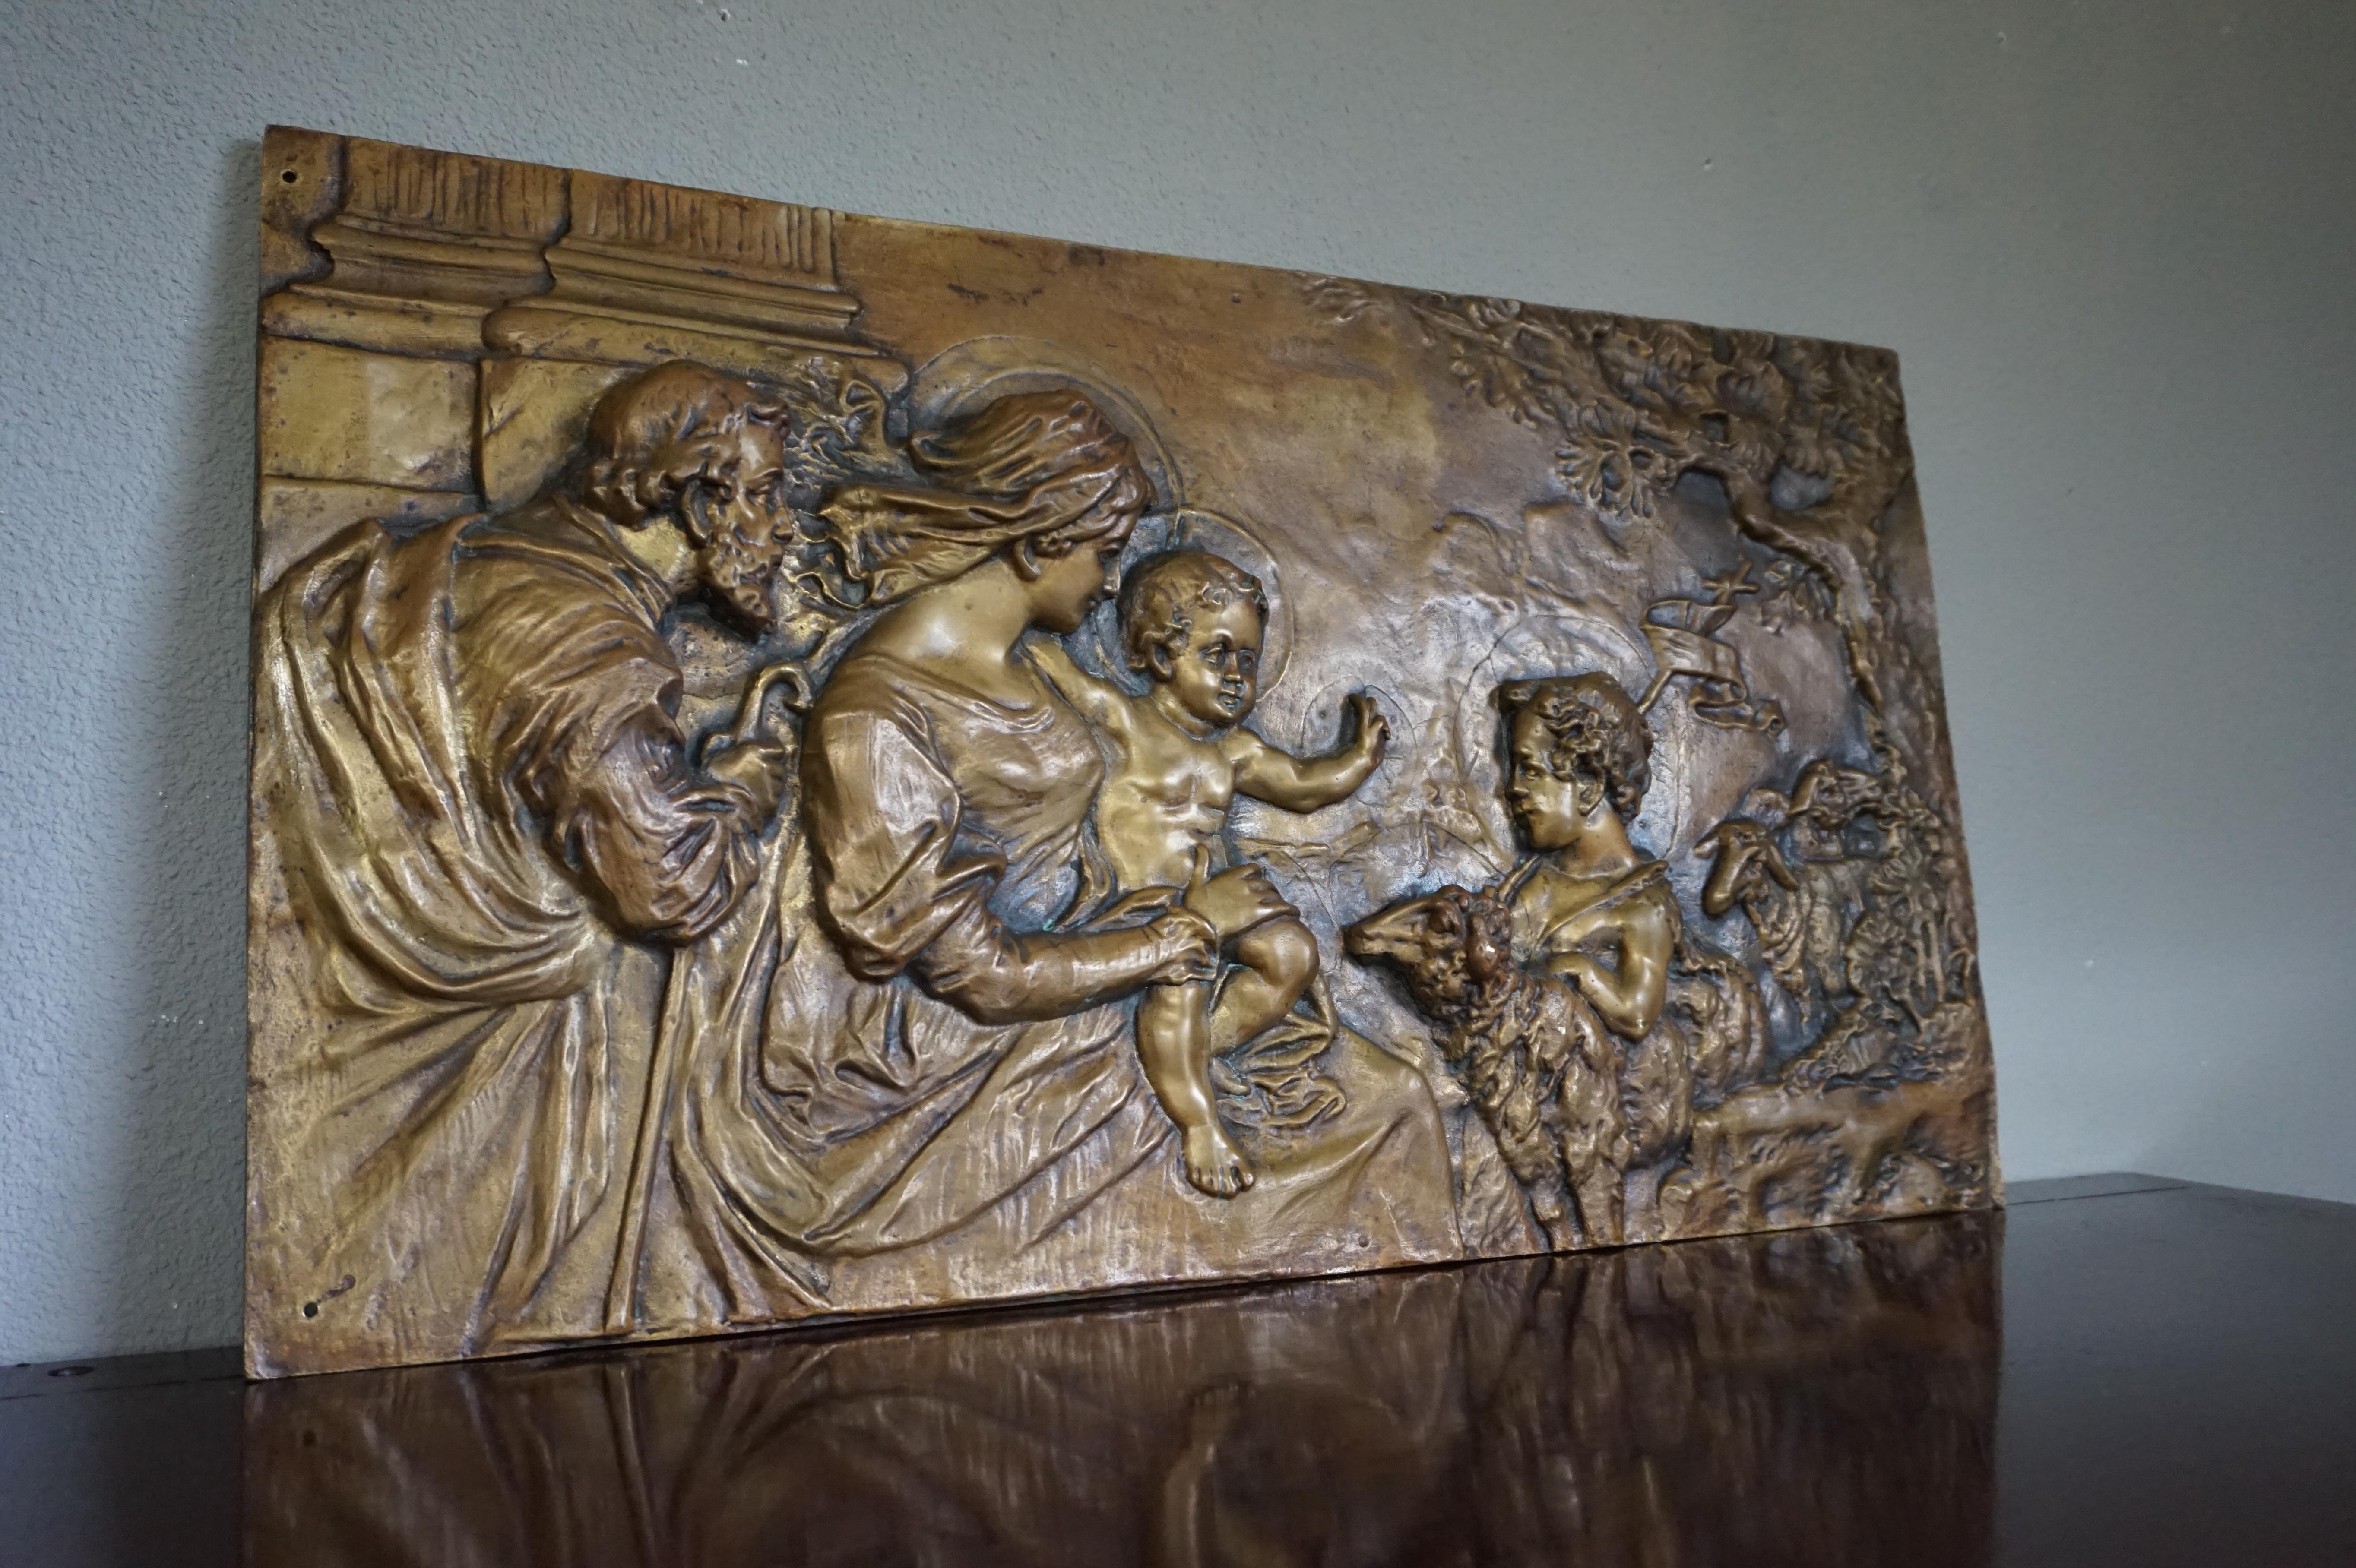 Symbolic and meaningful work of religious art.

Firstly, what we love about this rare (and possibly unique) bronze wall plaque is the carefree nature and the positivity that it radiates. Joseph is looking at Mary and the child Jesus and together